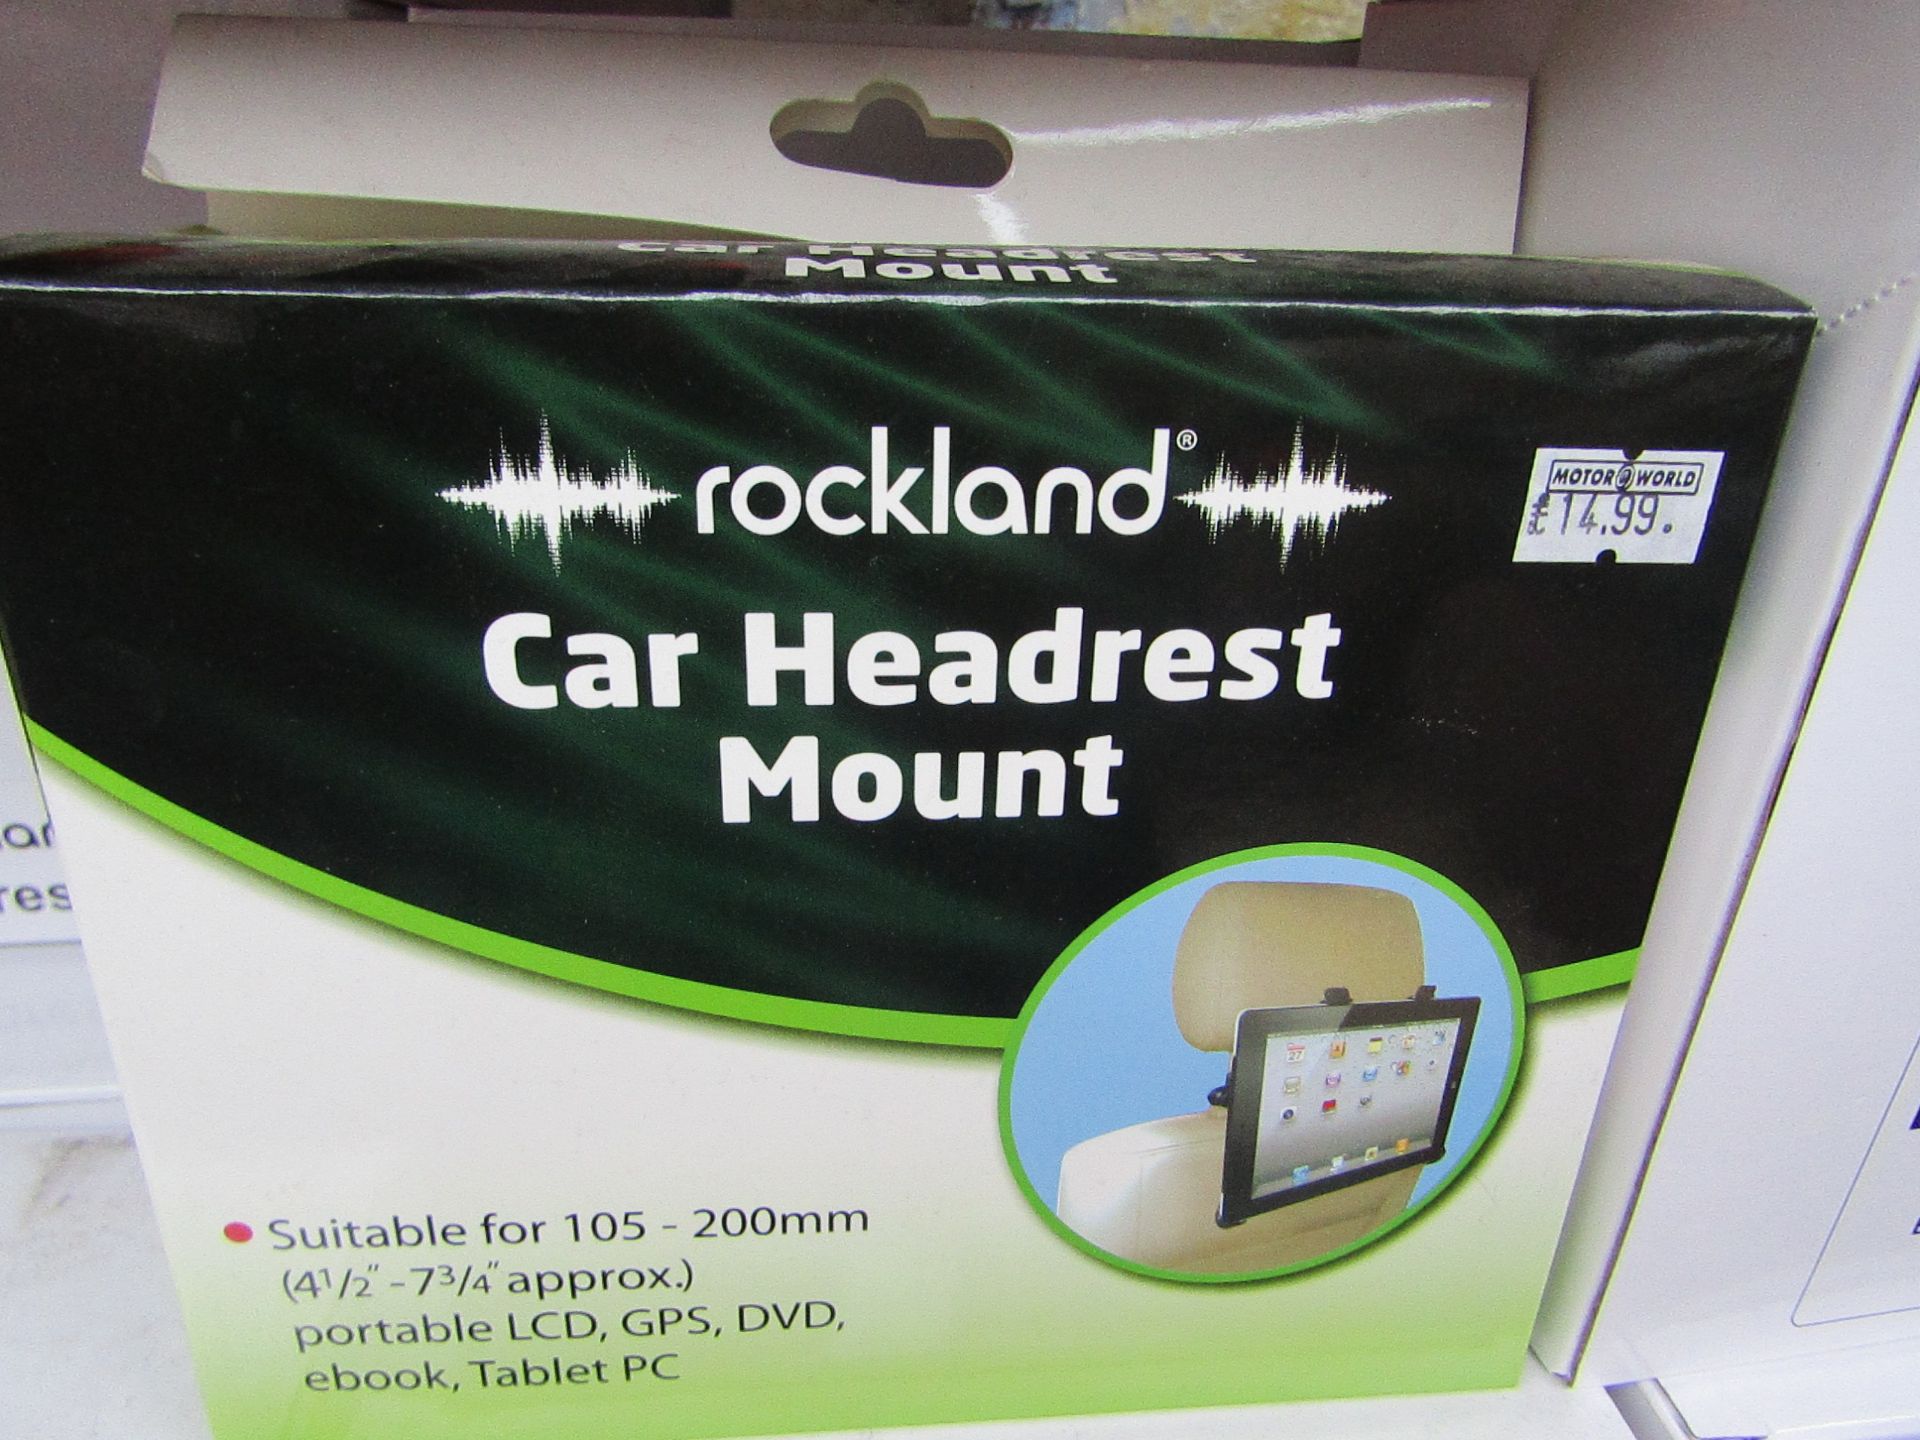 Box containing 2 Rockland Car Head rest mounts suitable for Tablets and devices up to 7" - New.